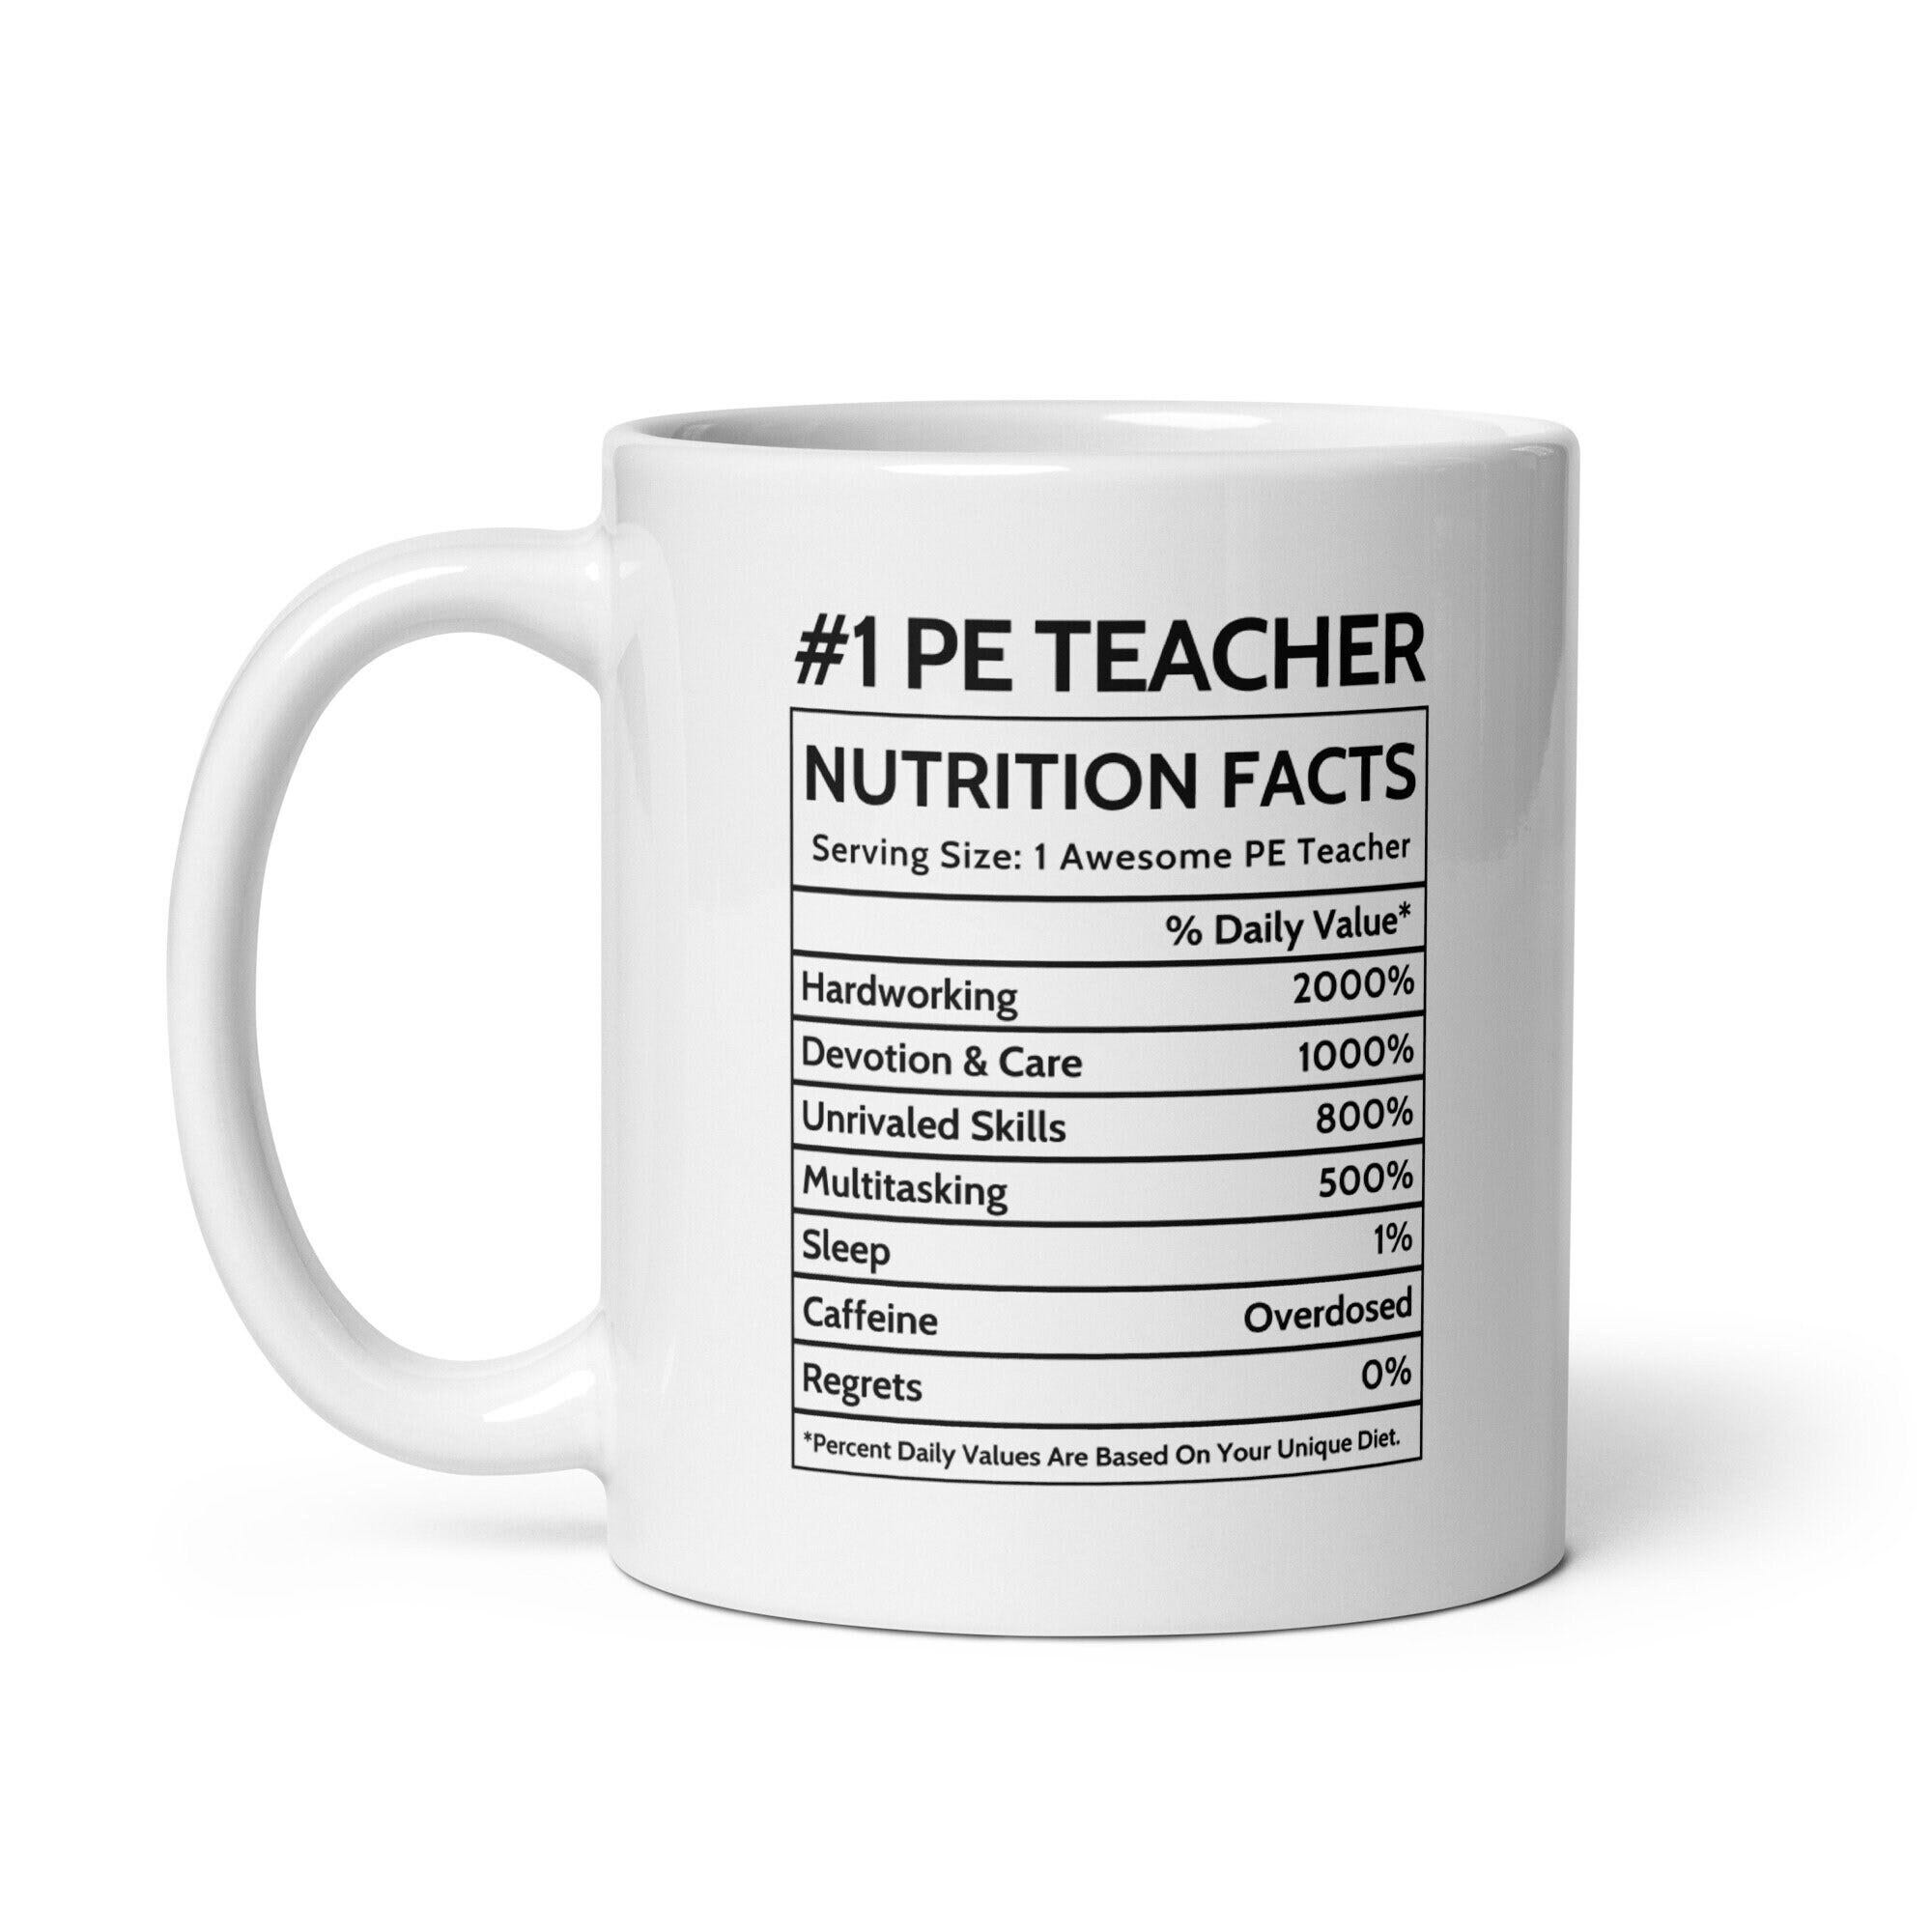 Personalized PE Teacher Gift, Nutrition Facts Mug, Physical Education Teaching Graduation Gift, New Job Coworker Gift, Mother